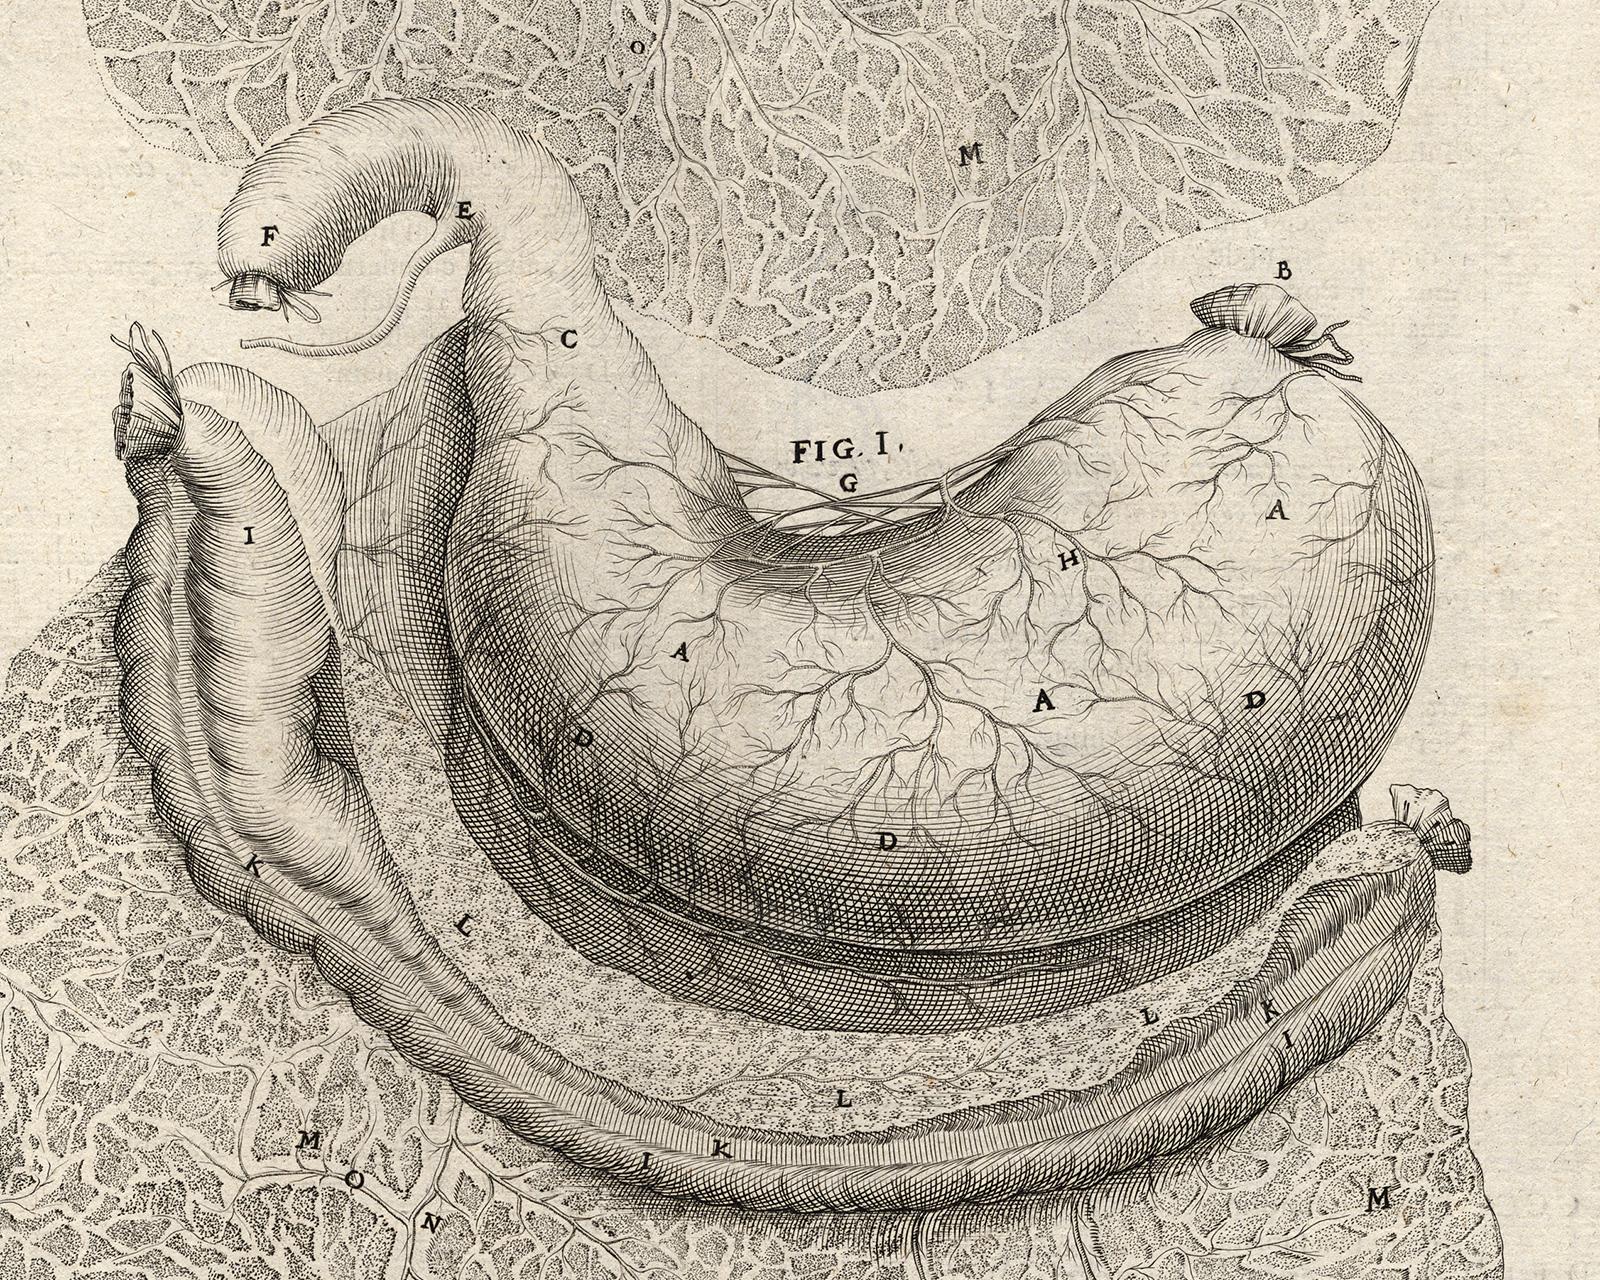 Anatomical print - stomach and colon - by Spigelius - Engraving - 17th c - Old Masters Print by Adrianus Spigelius